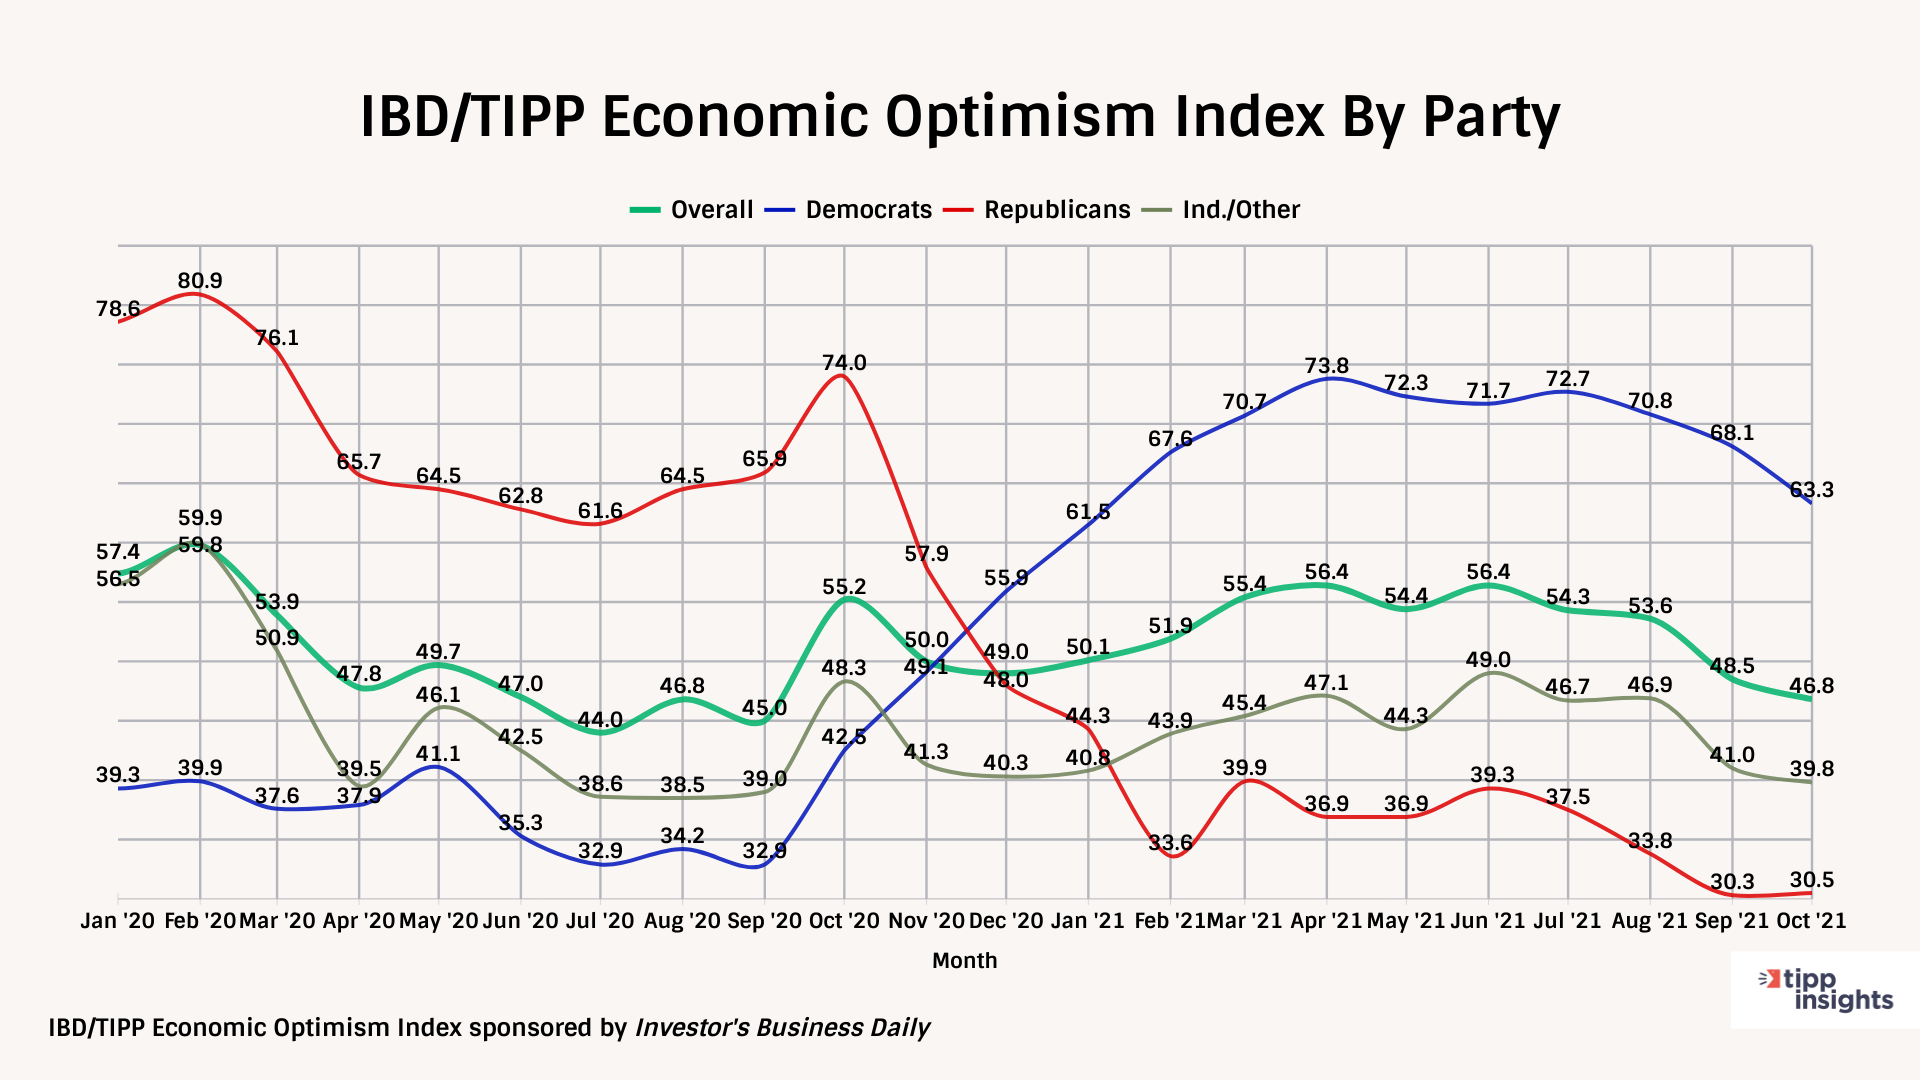 IBD/TIPP Economic Optimism Tracking Chart By Party